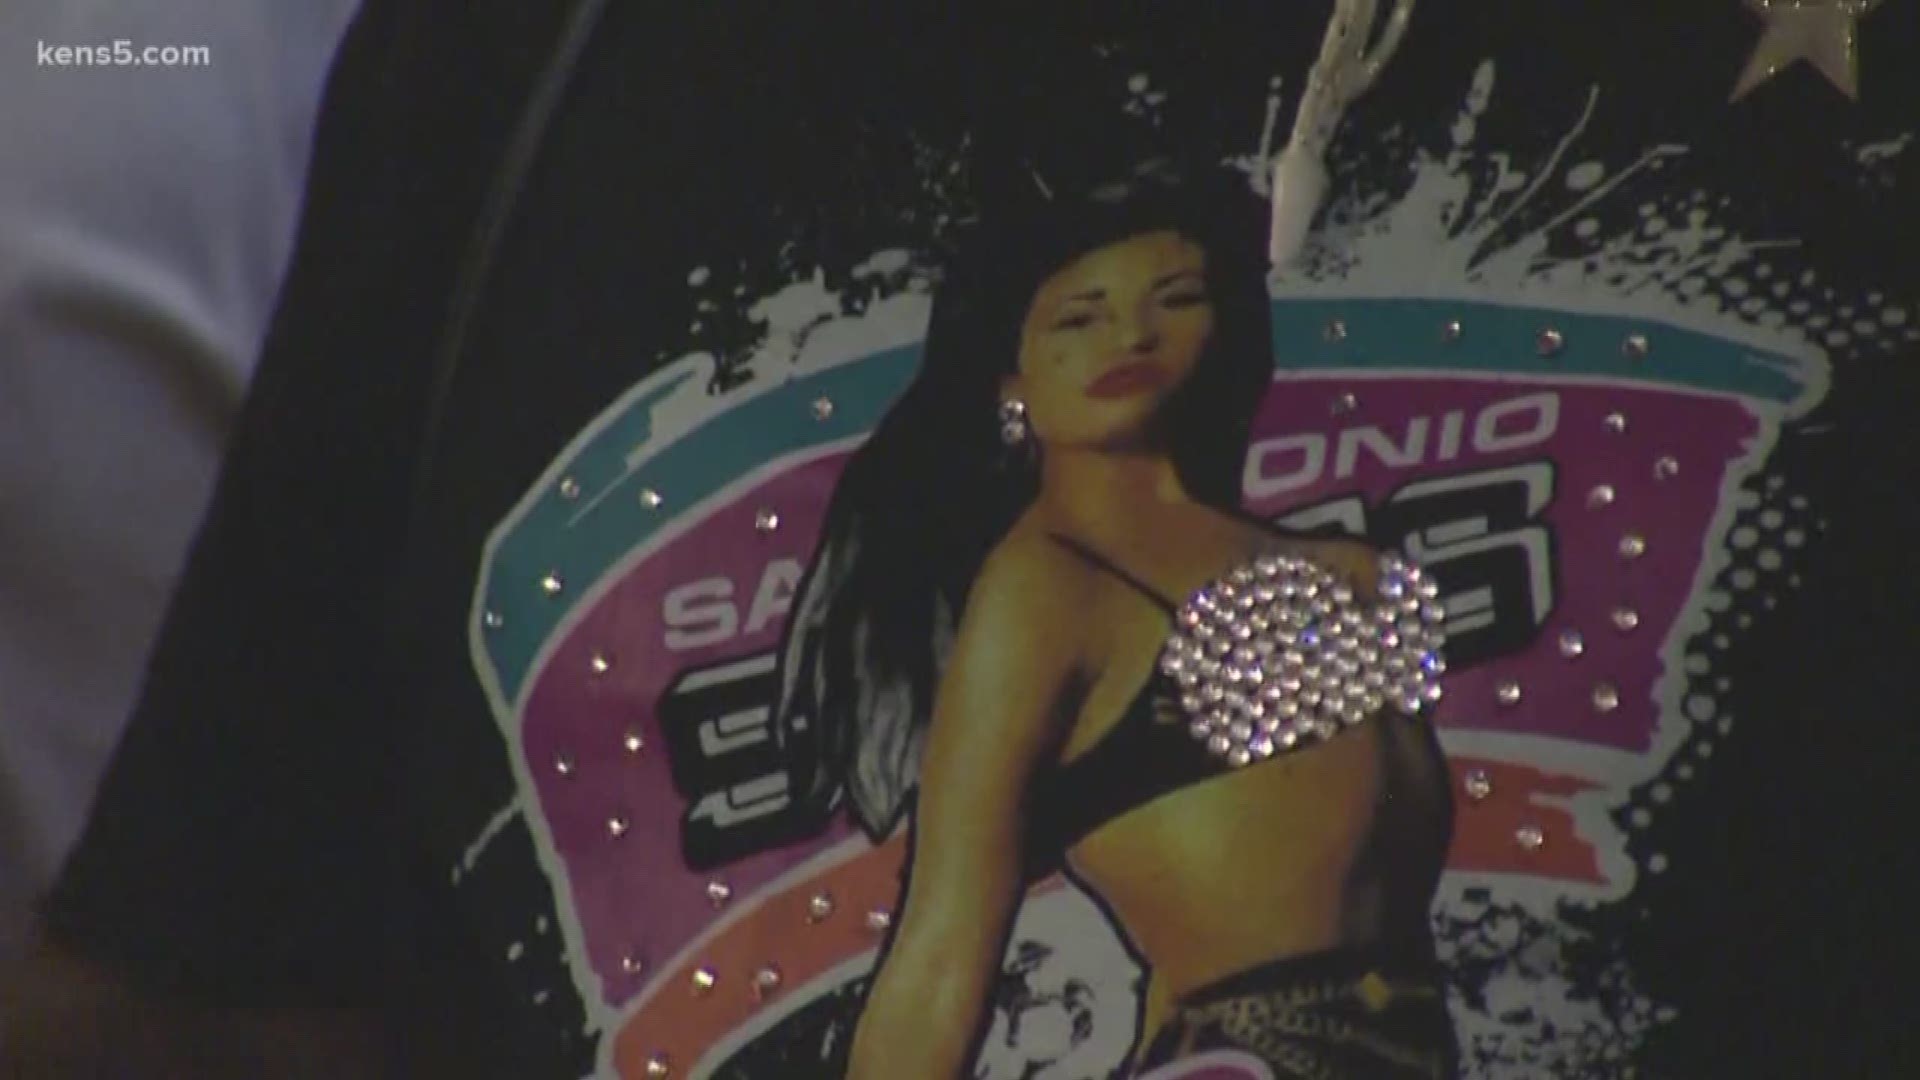 Nearly 24 years after Selena performed at the grand opening of the Hard Rock Cafe in San Antonio, the venue hosted an event to determine the city's biggest Selena fan.